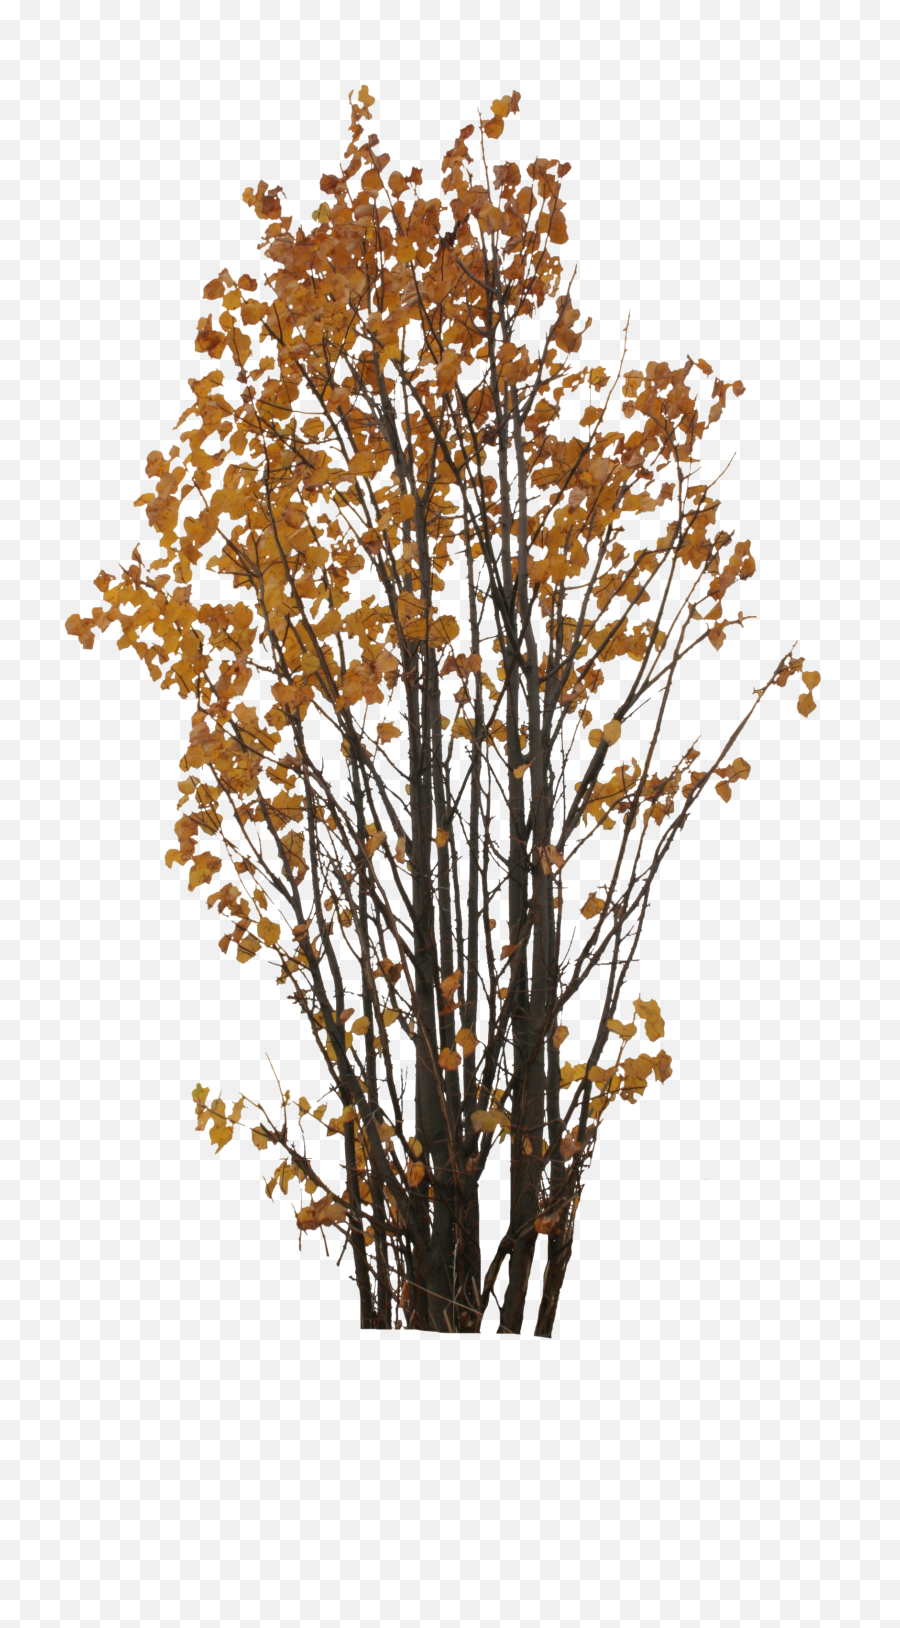 Autumn Tree Png Clipart Free Download - Portable Network Graphics,Free Tree Png